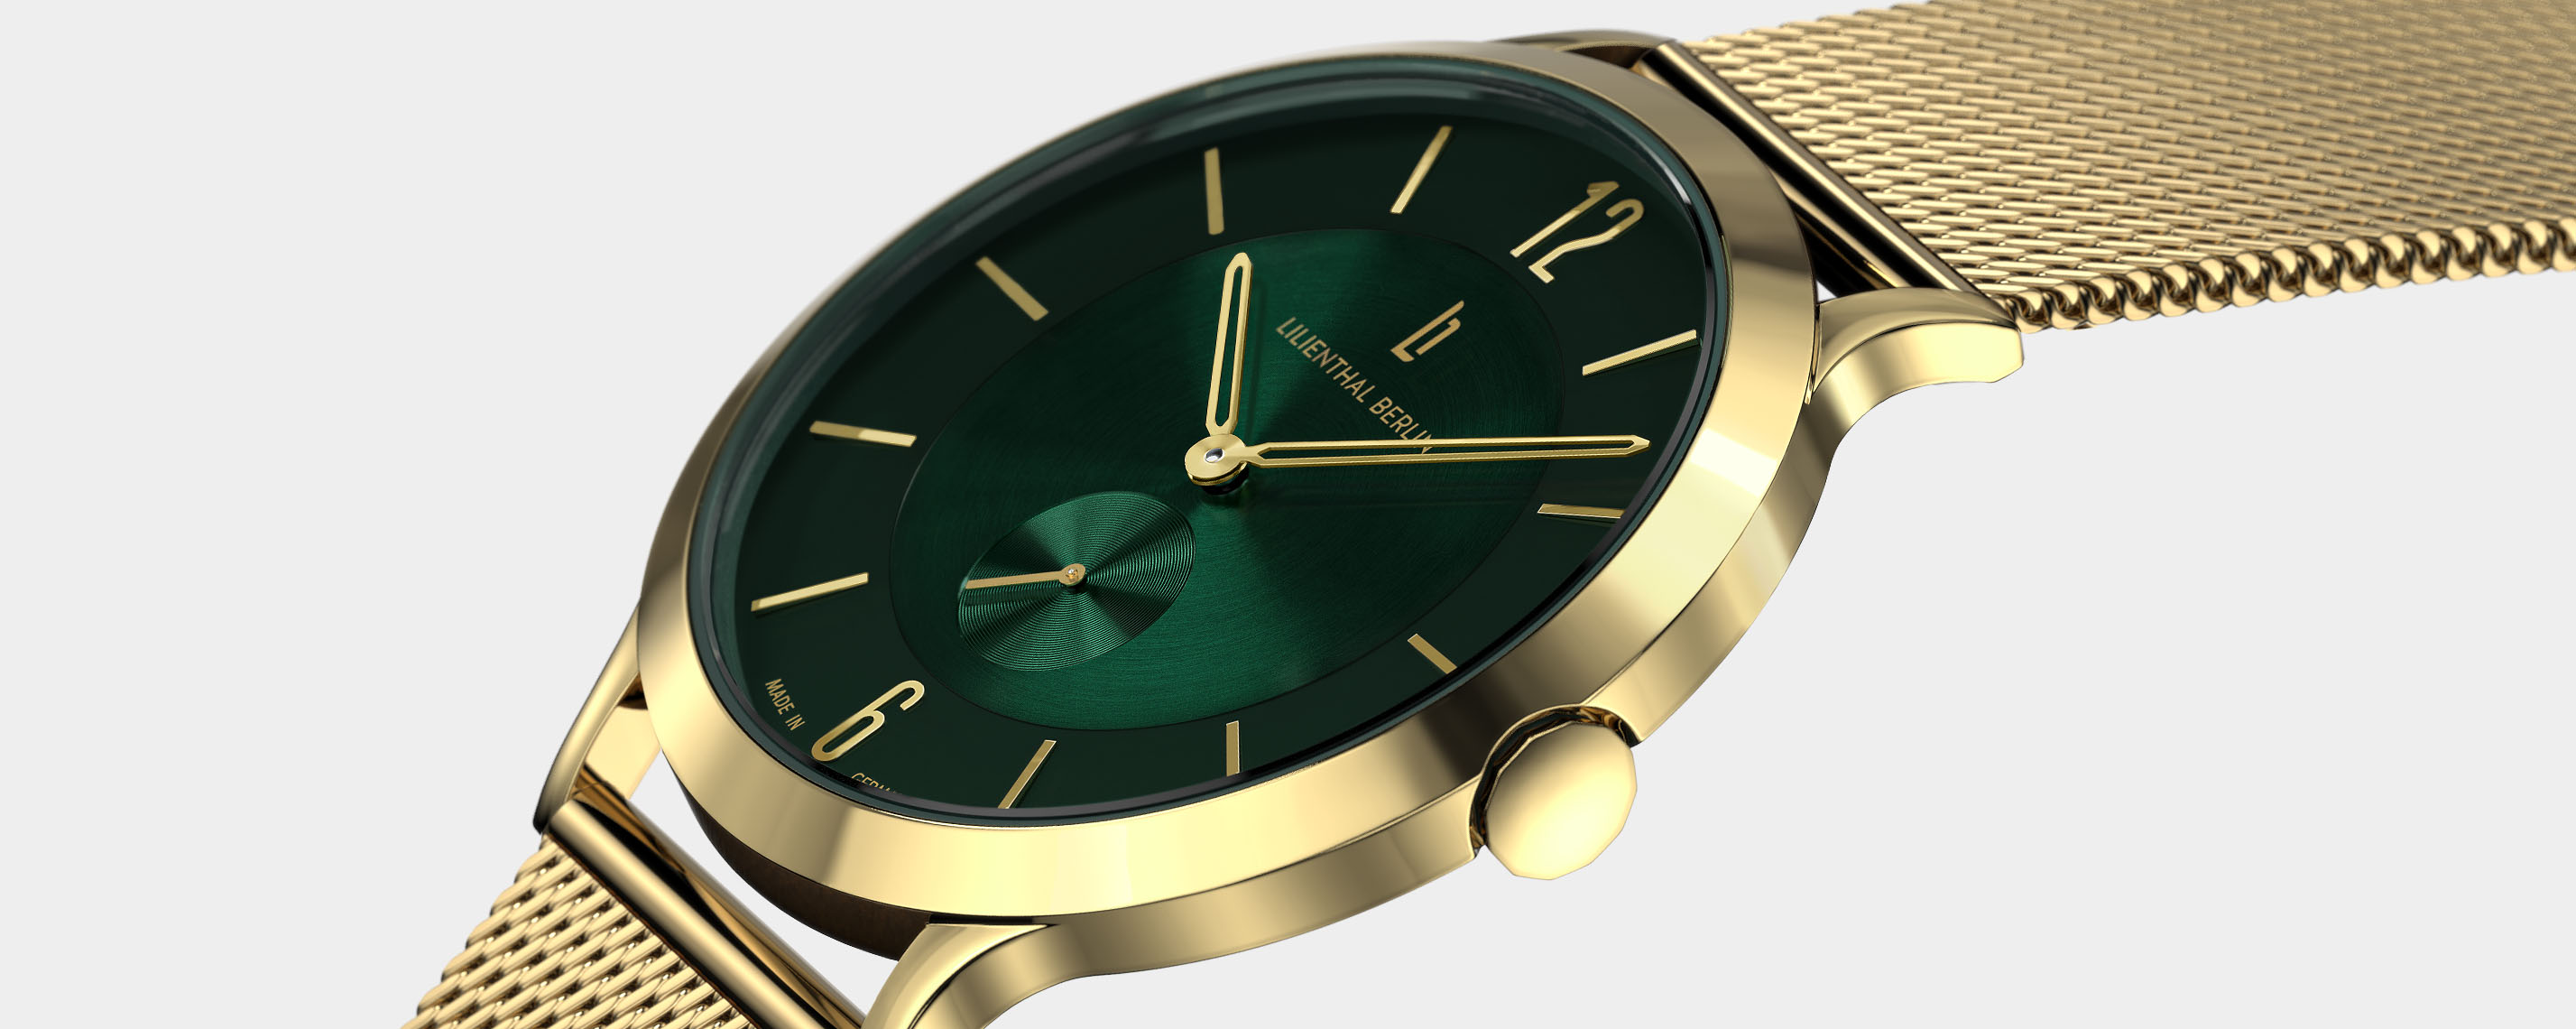 The Classic Gold Green - mesh gold | Lilienthal Berlin - Award 